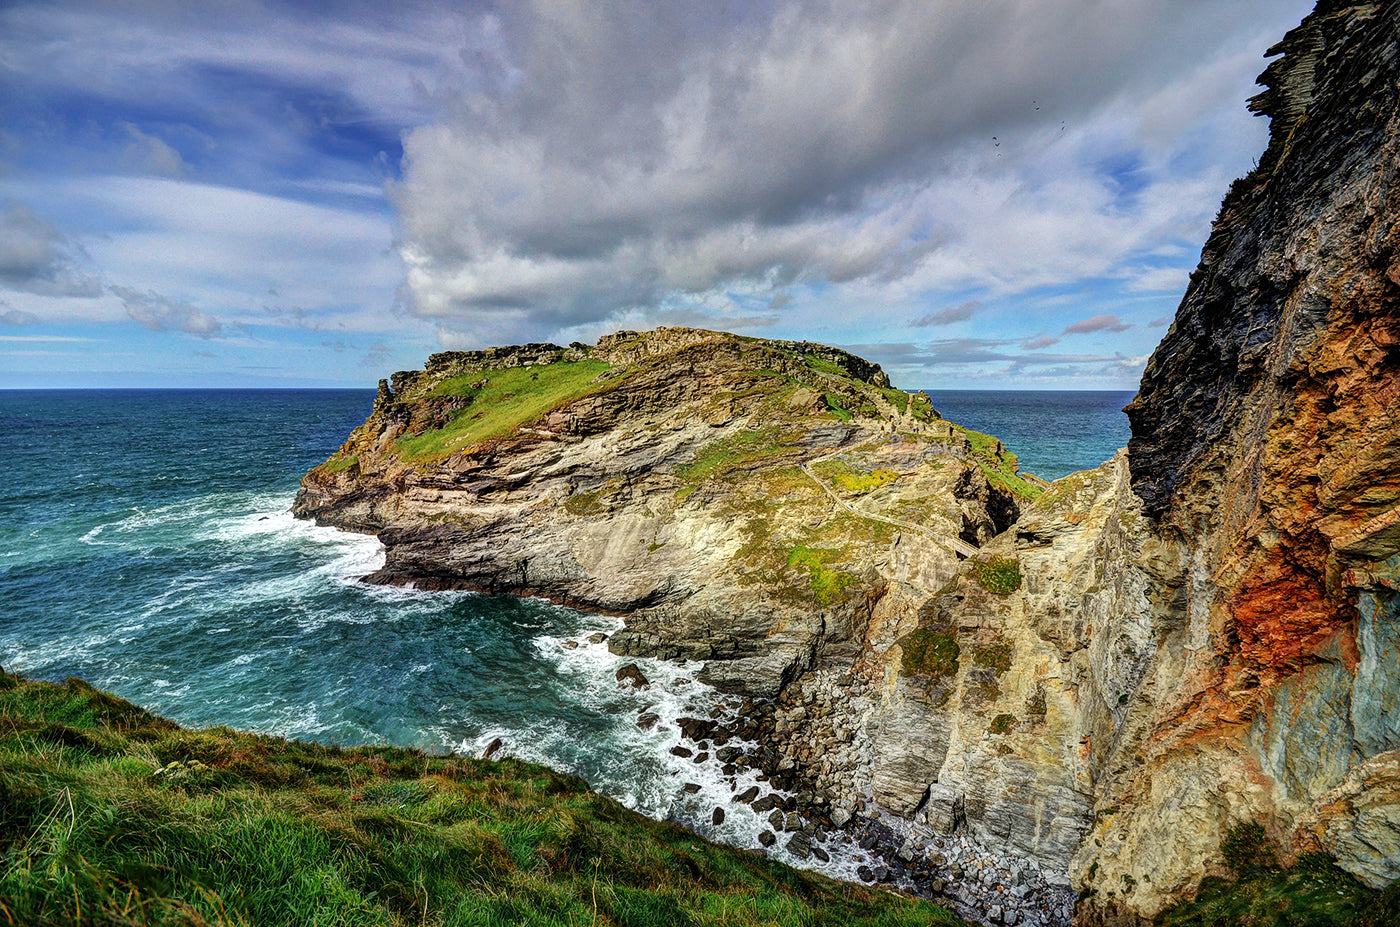 Rough cliffs in front of the South West Coast in England along the South West Coast Path. (Photo: Baz Richardson)